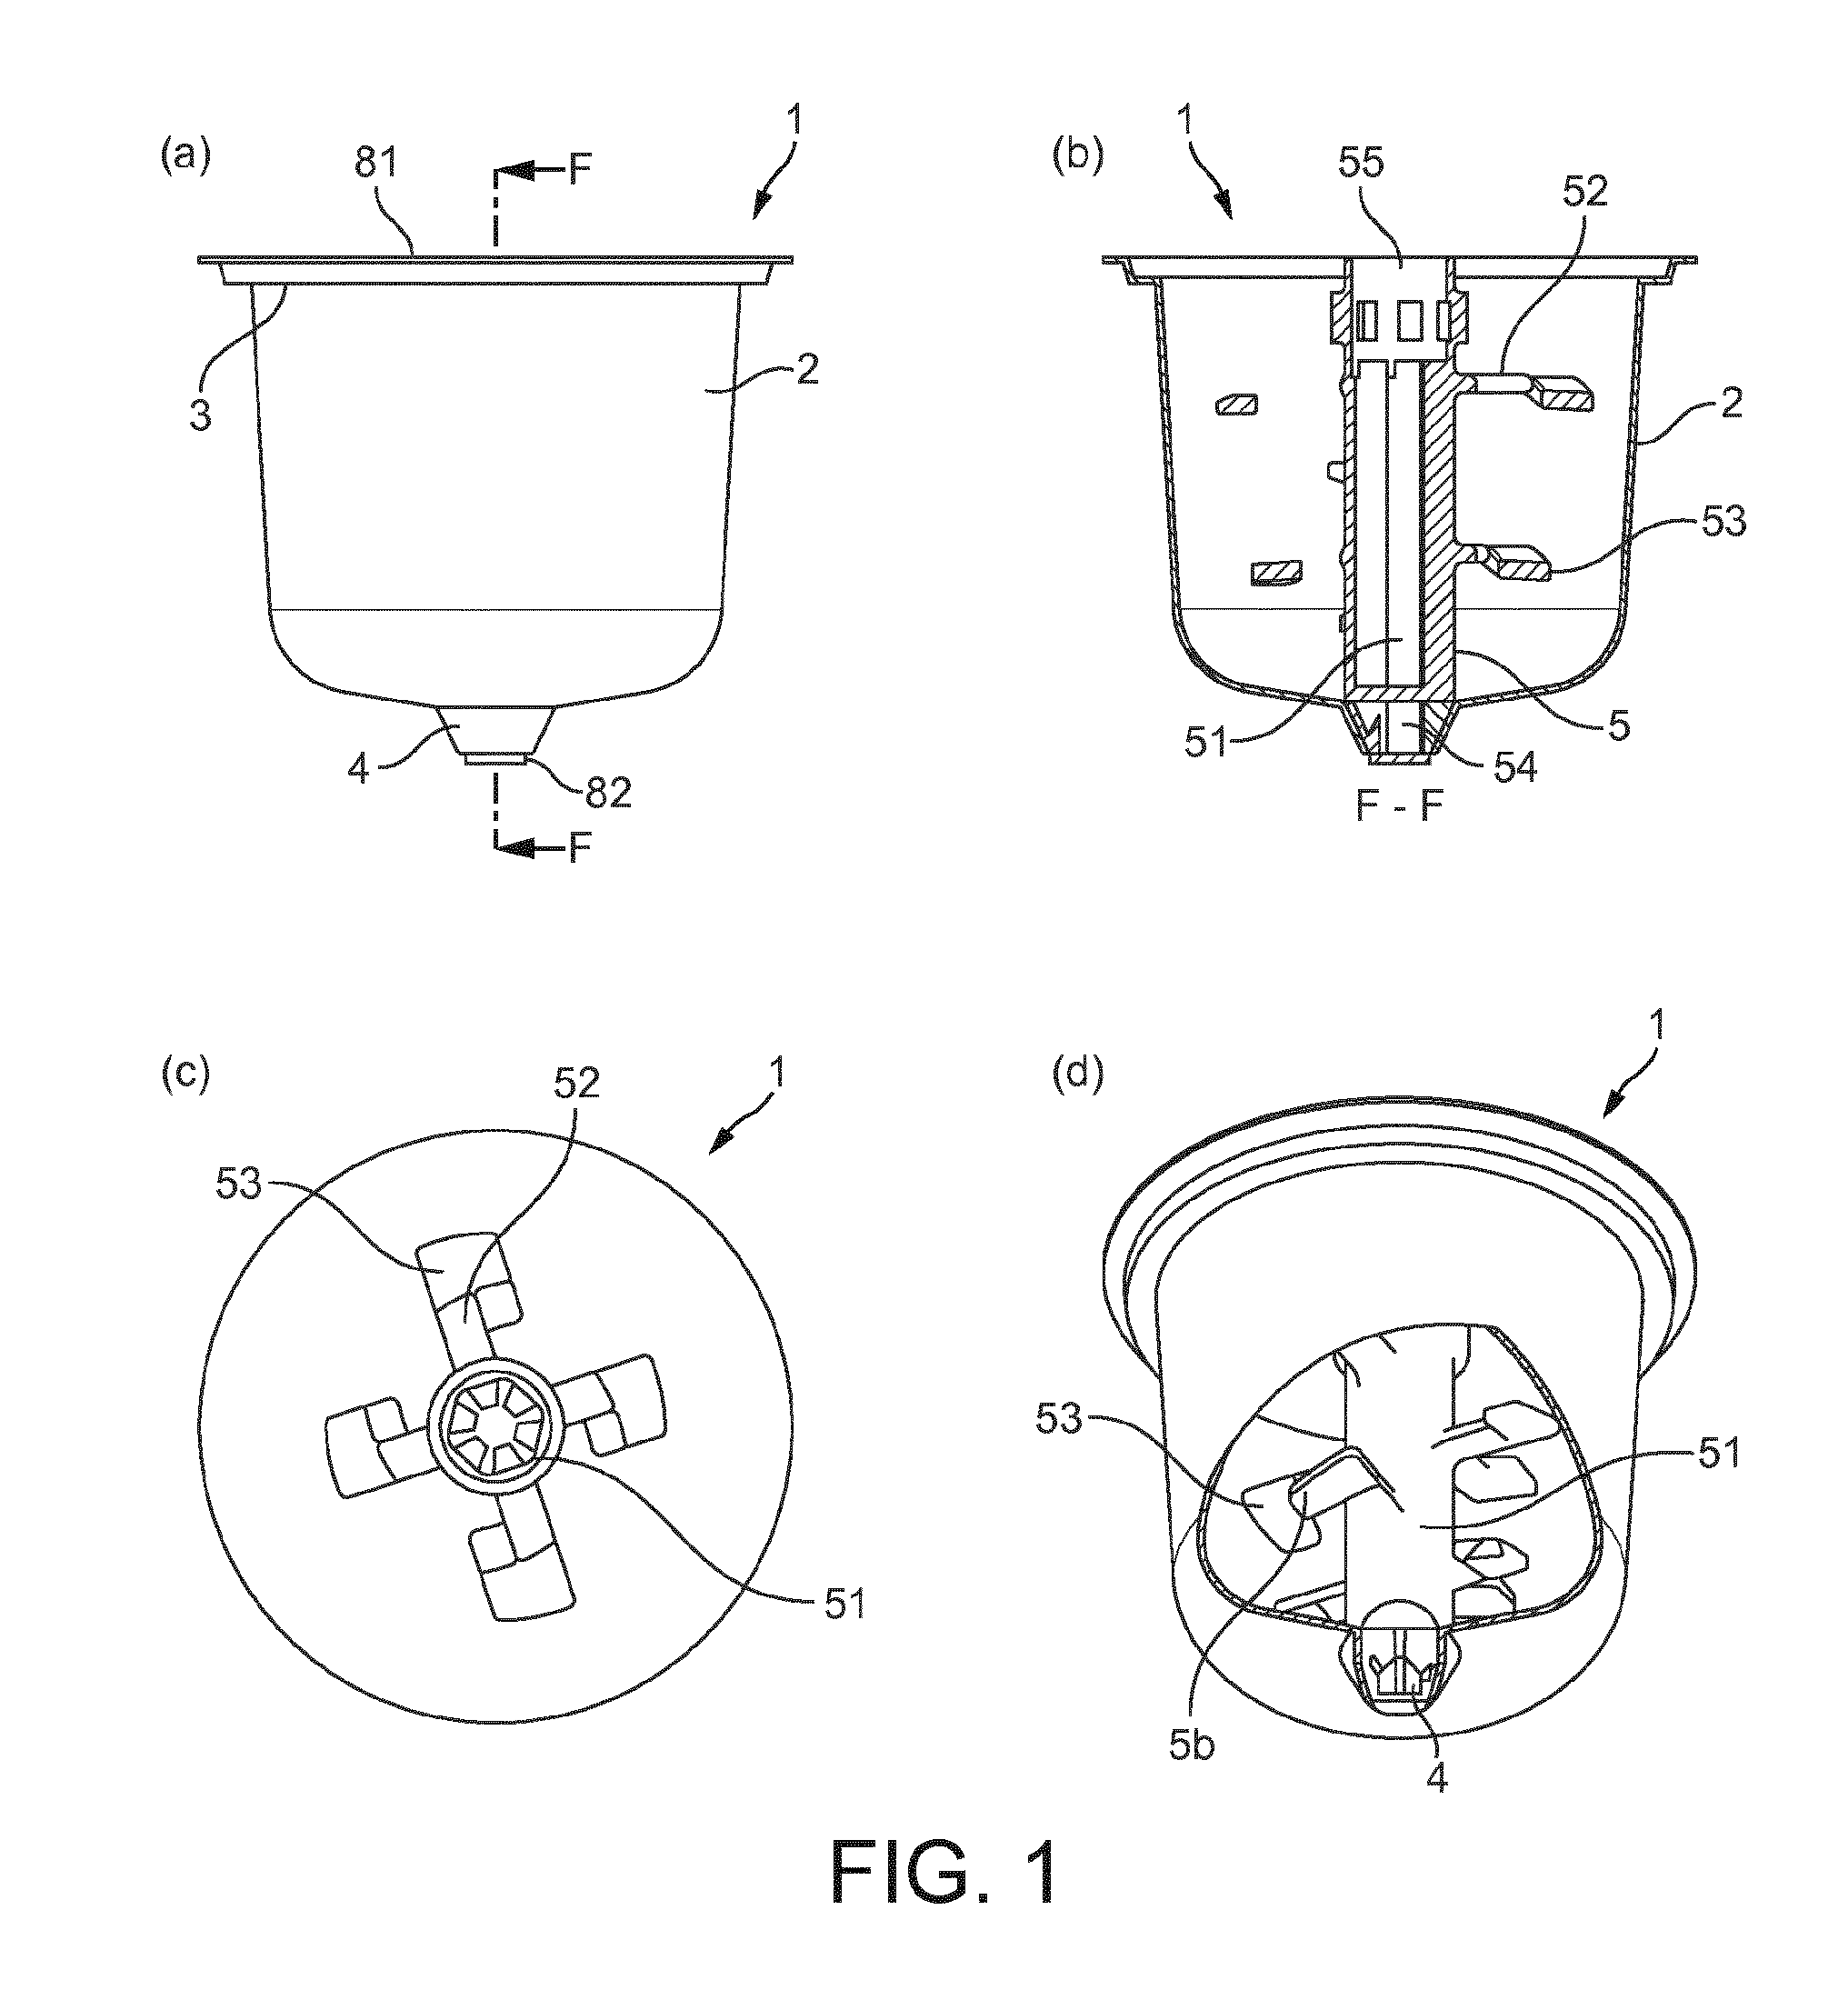 Capsule, method and system for preparing a viscous beverage or food product